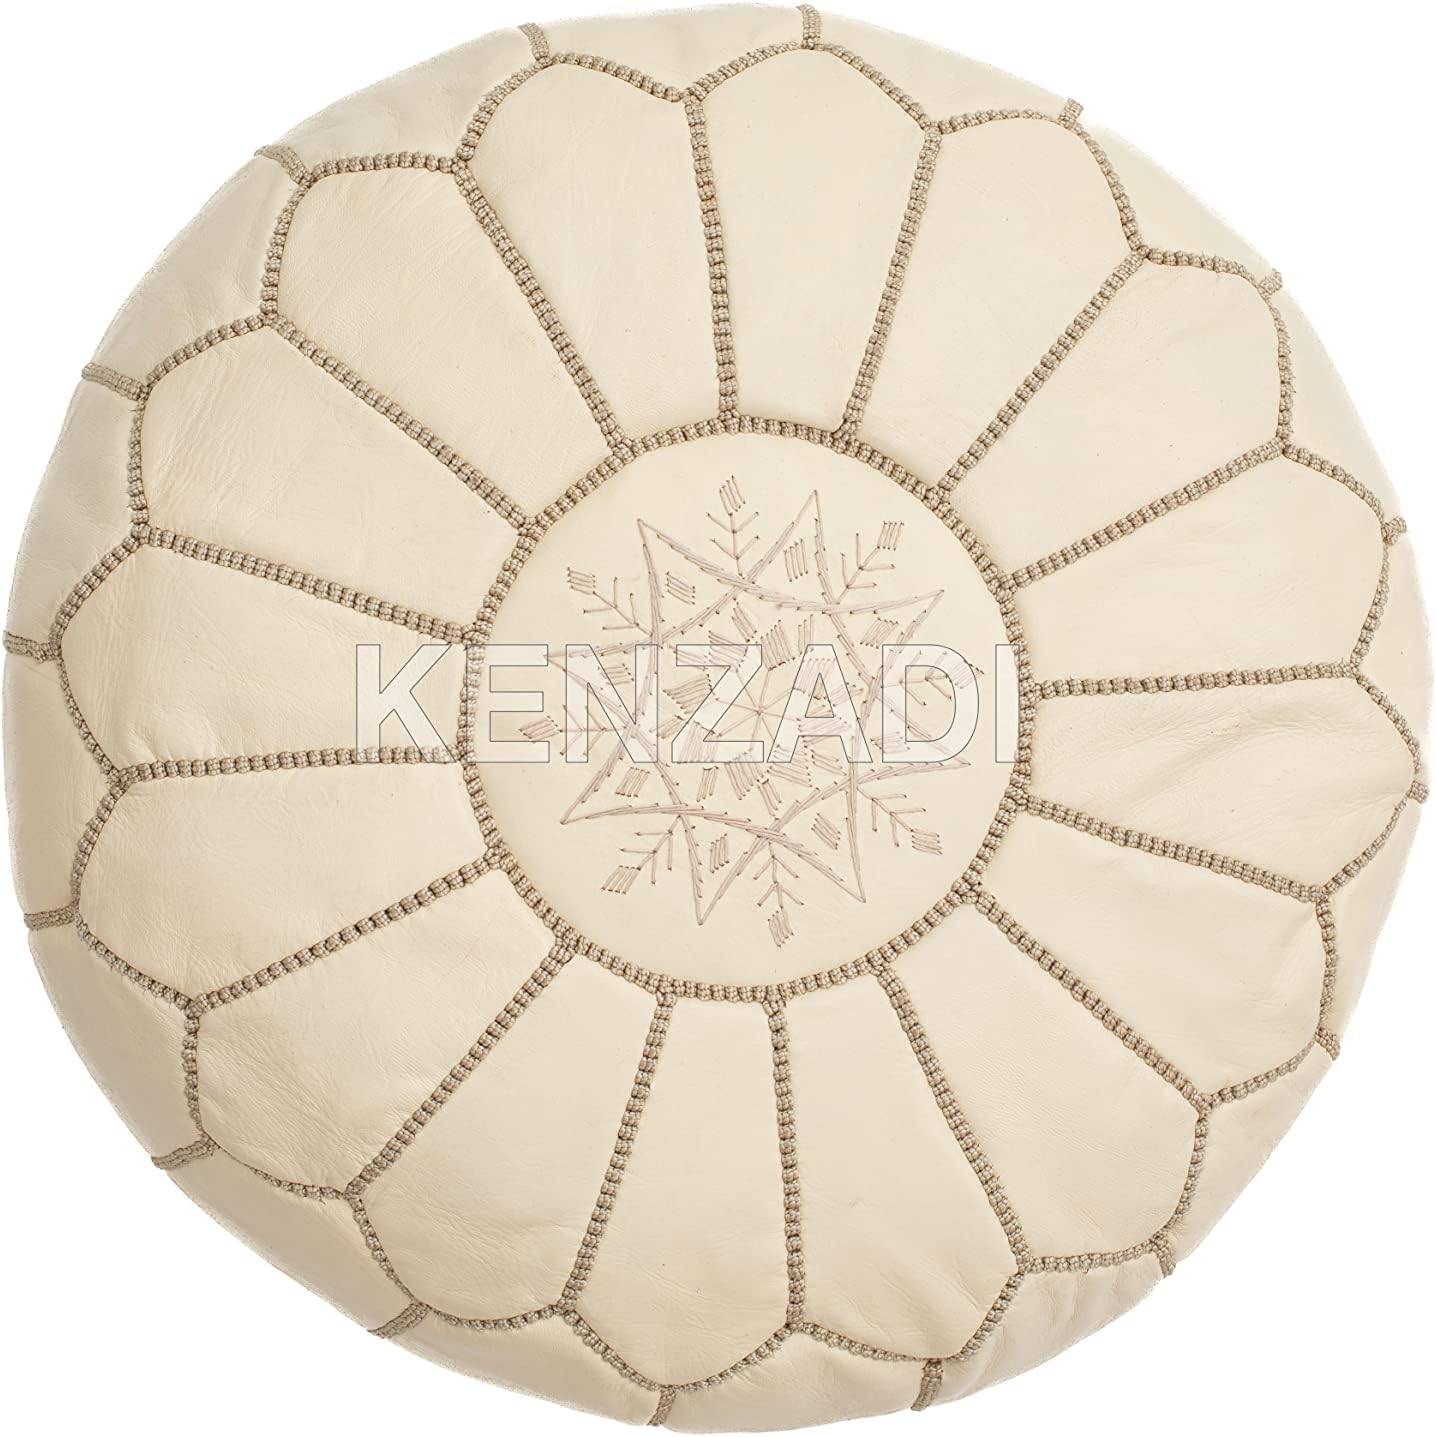 Genuine Leather Pouf Stuffed Handmade Stitched in Marrakech by Moroccan Artisans (Creamy White) - Handmade by My Poufs